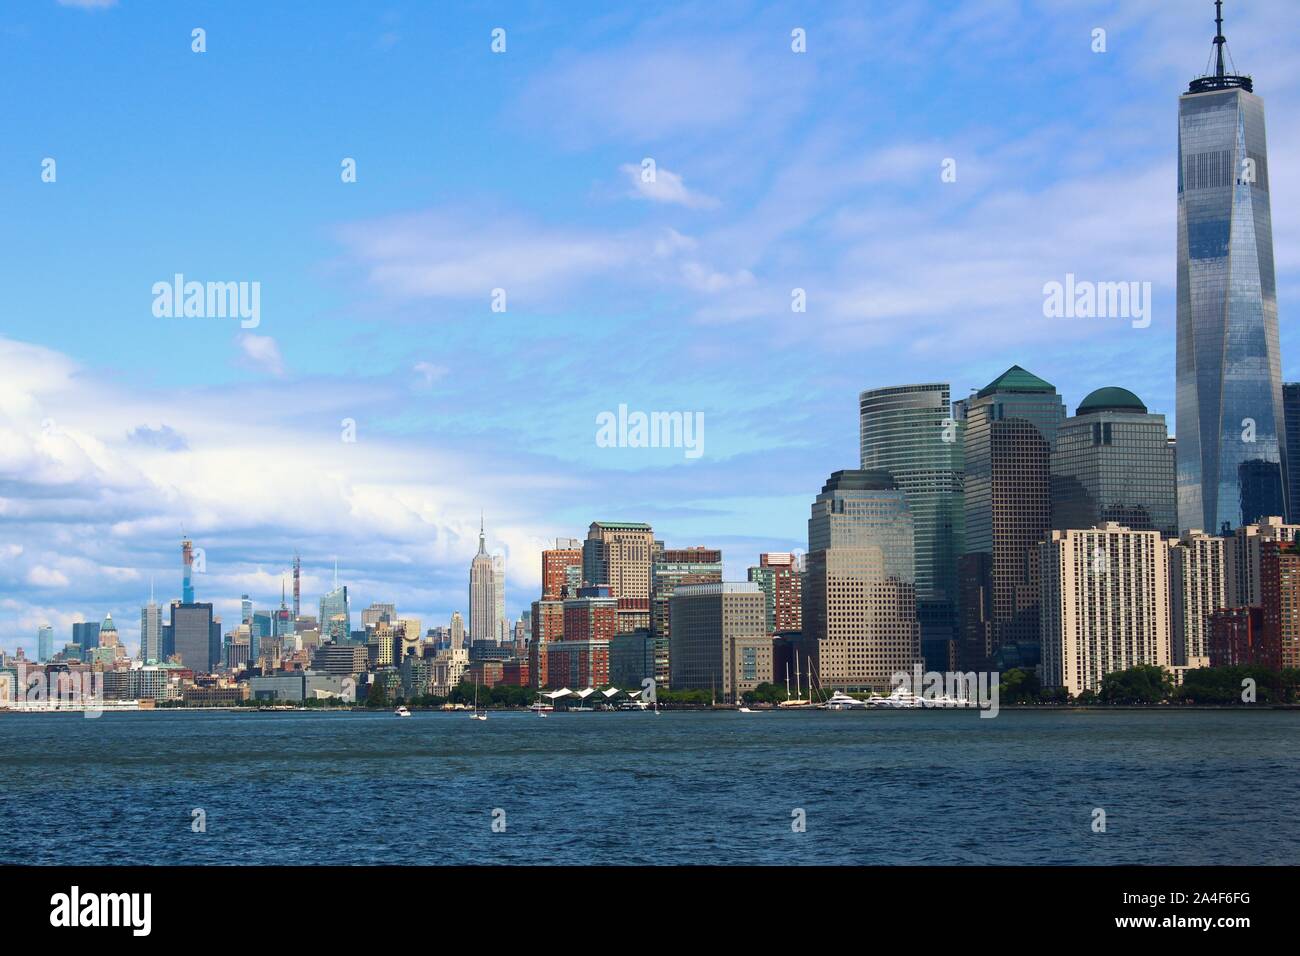 Skyline Cityscape view of West Side Lower Manhattan, New York City, taken from the Hudson River. Stock Photo